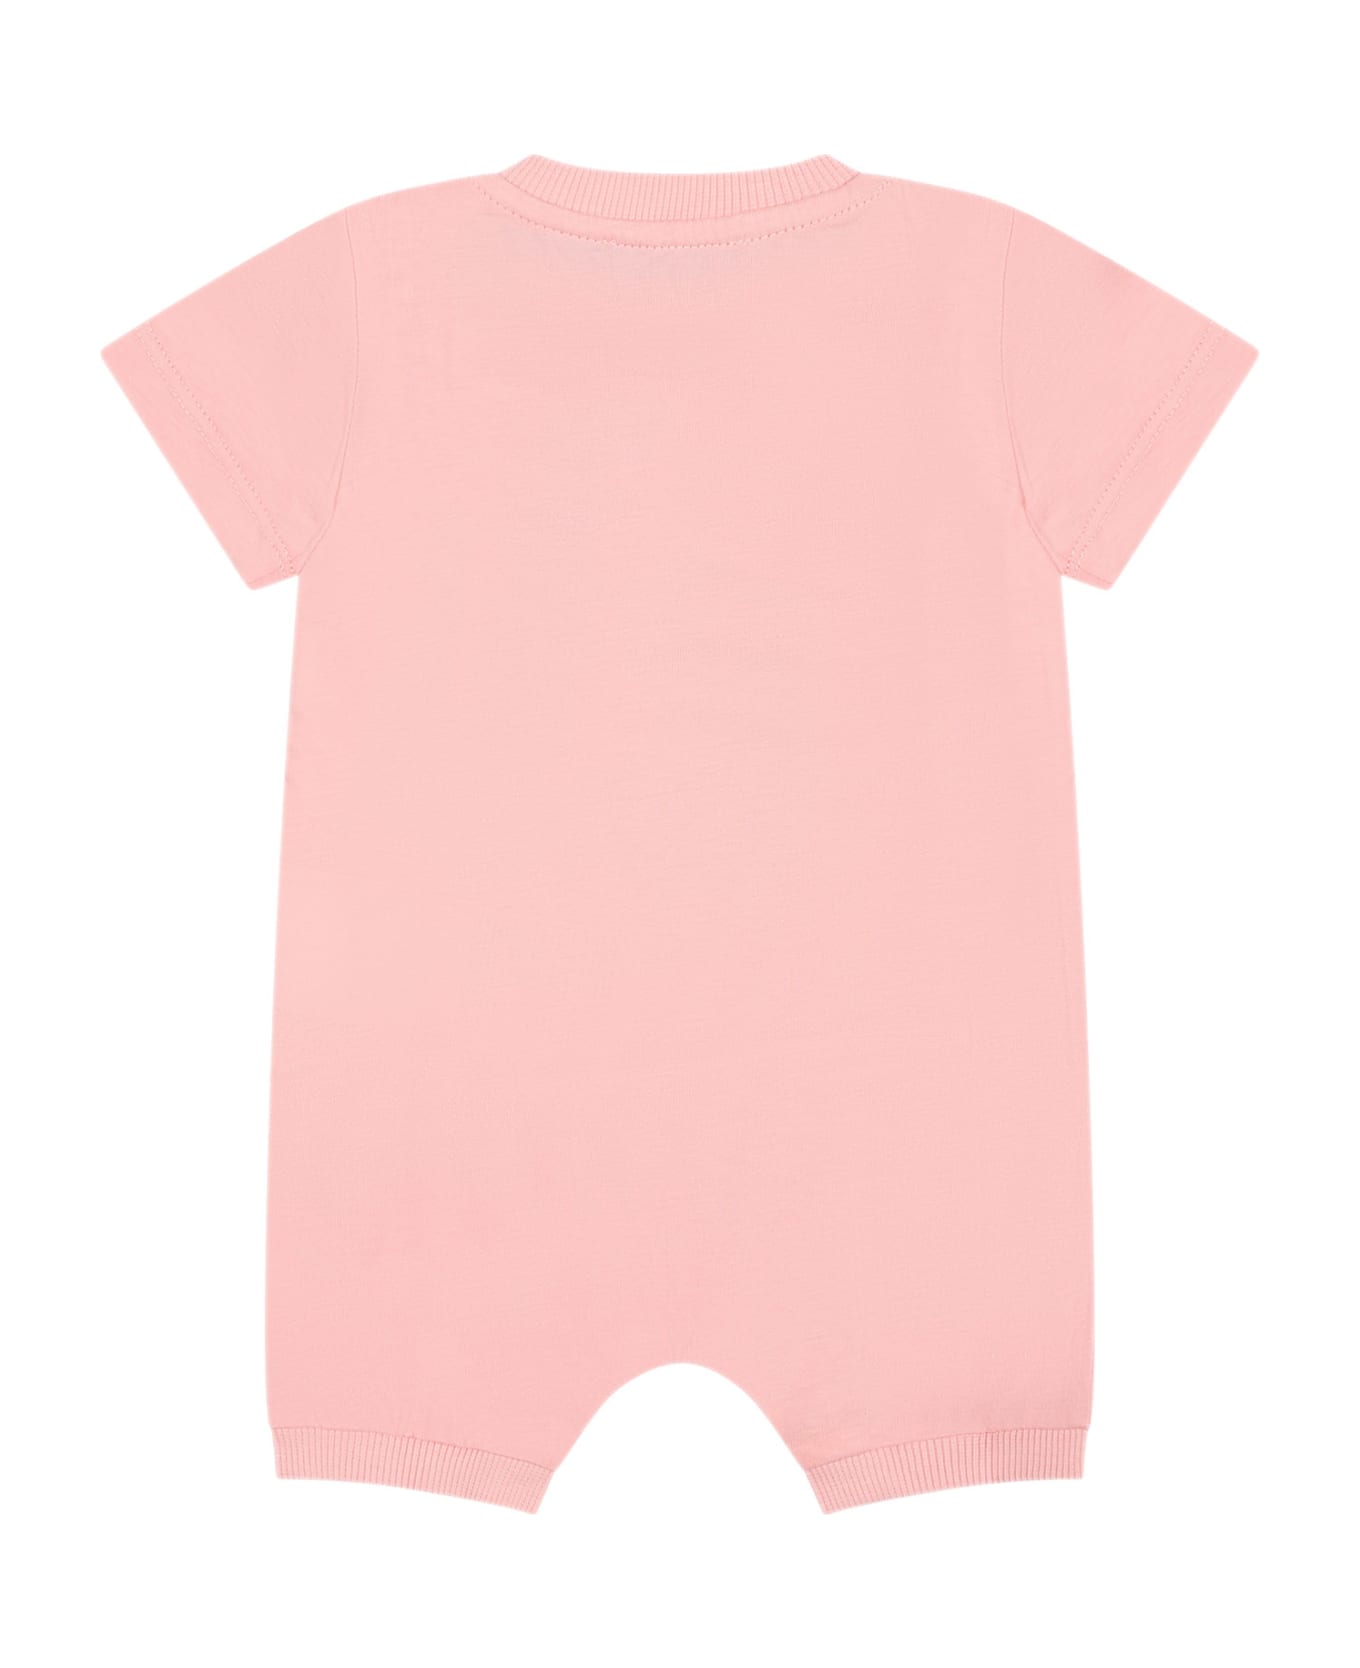 Moschino Pink Bodysuit For Babies With Teddy Bear And Pinwheel - Pink